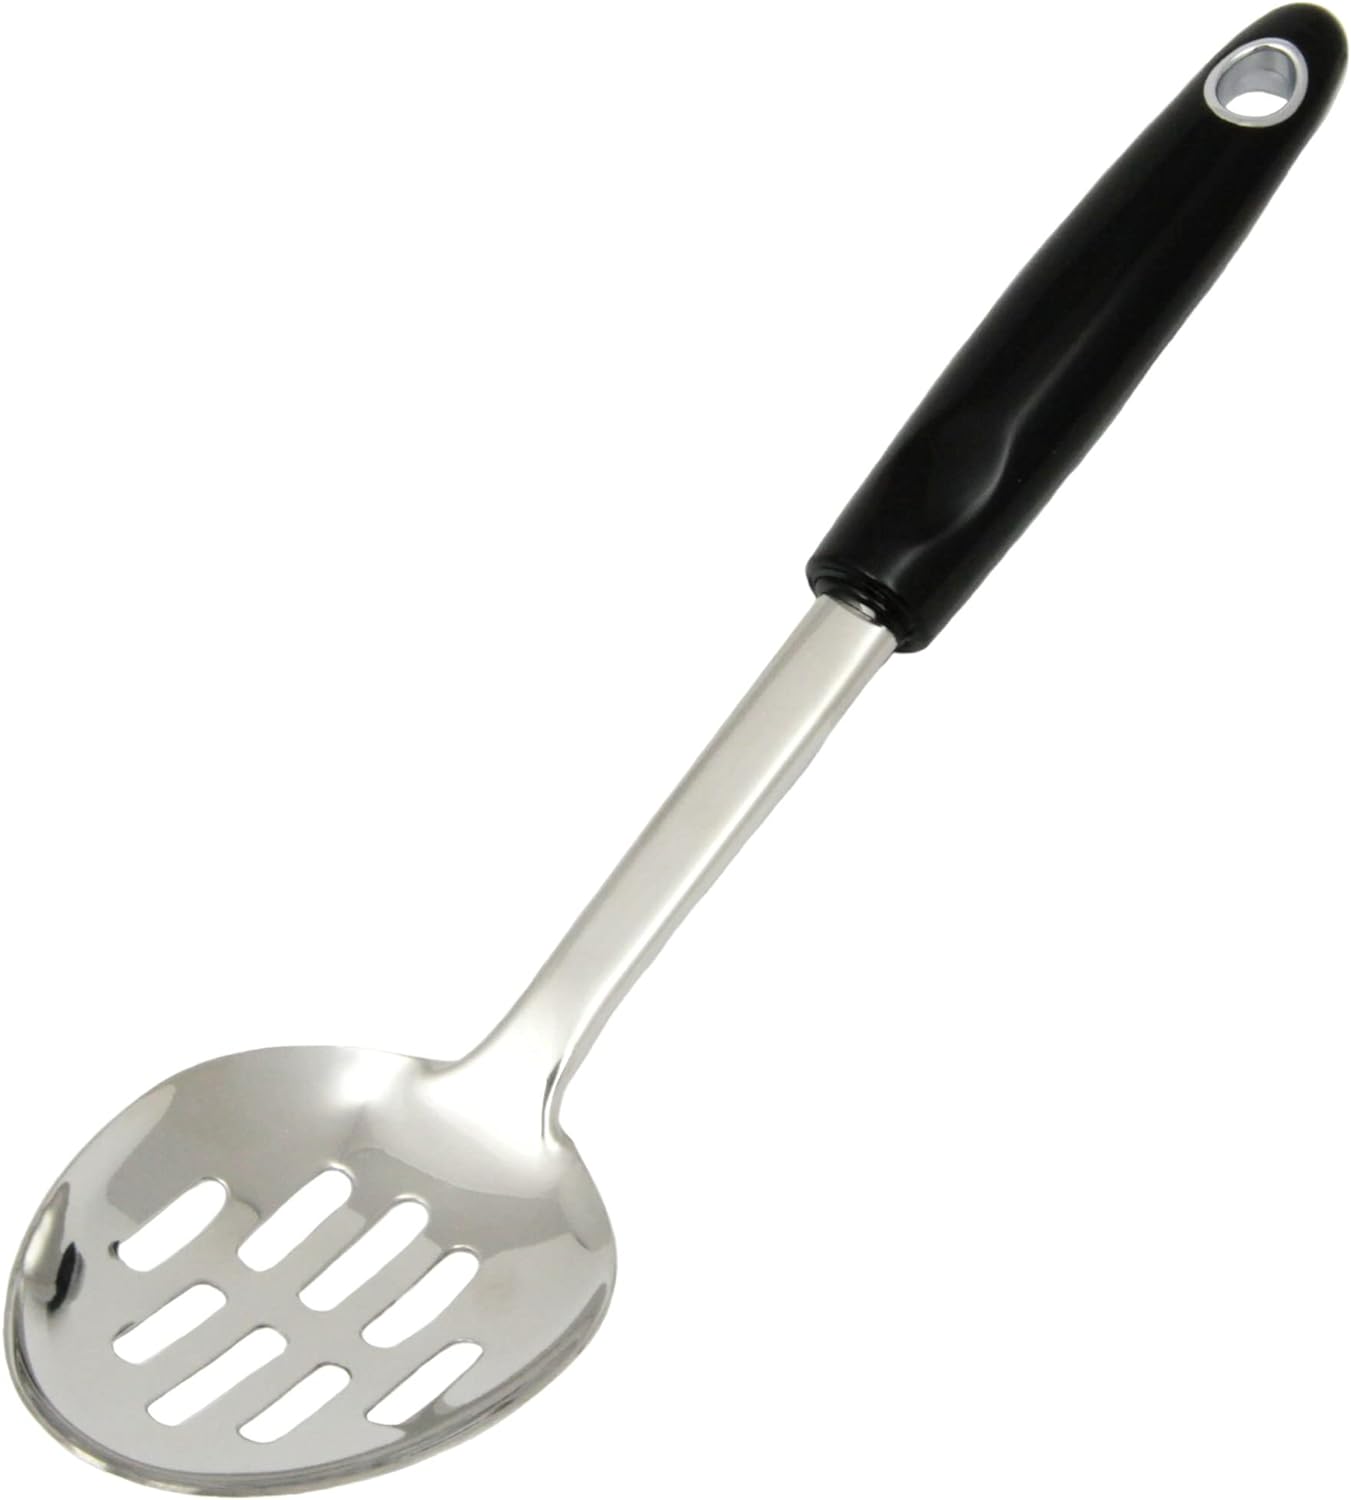 slotted spoon.